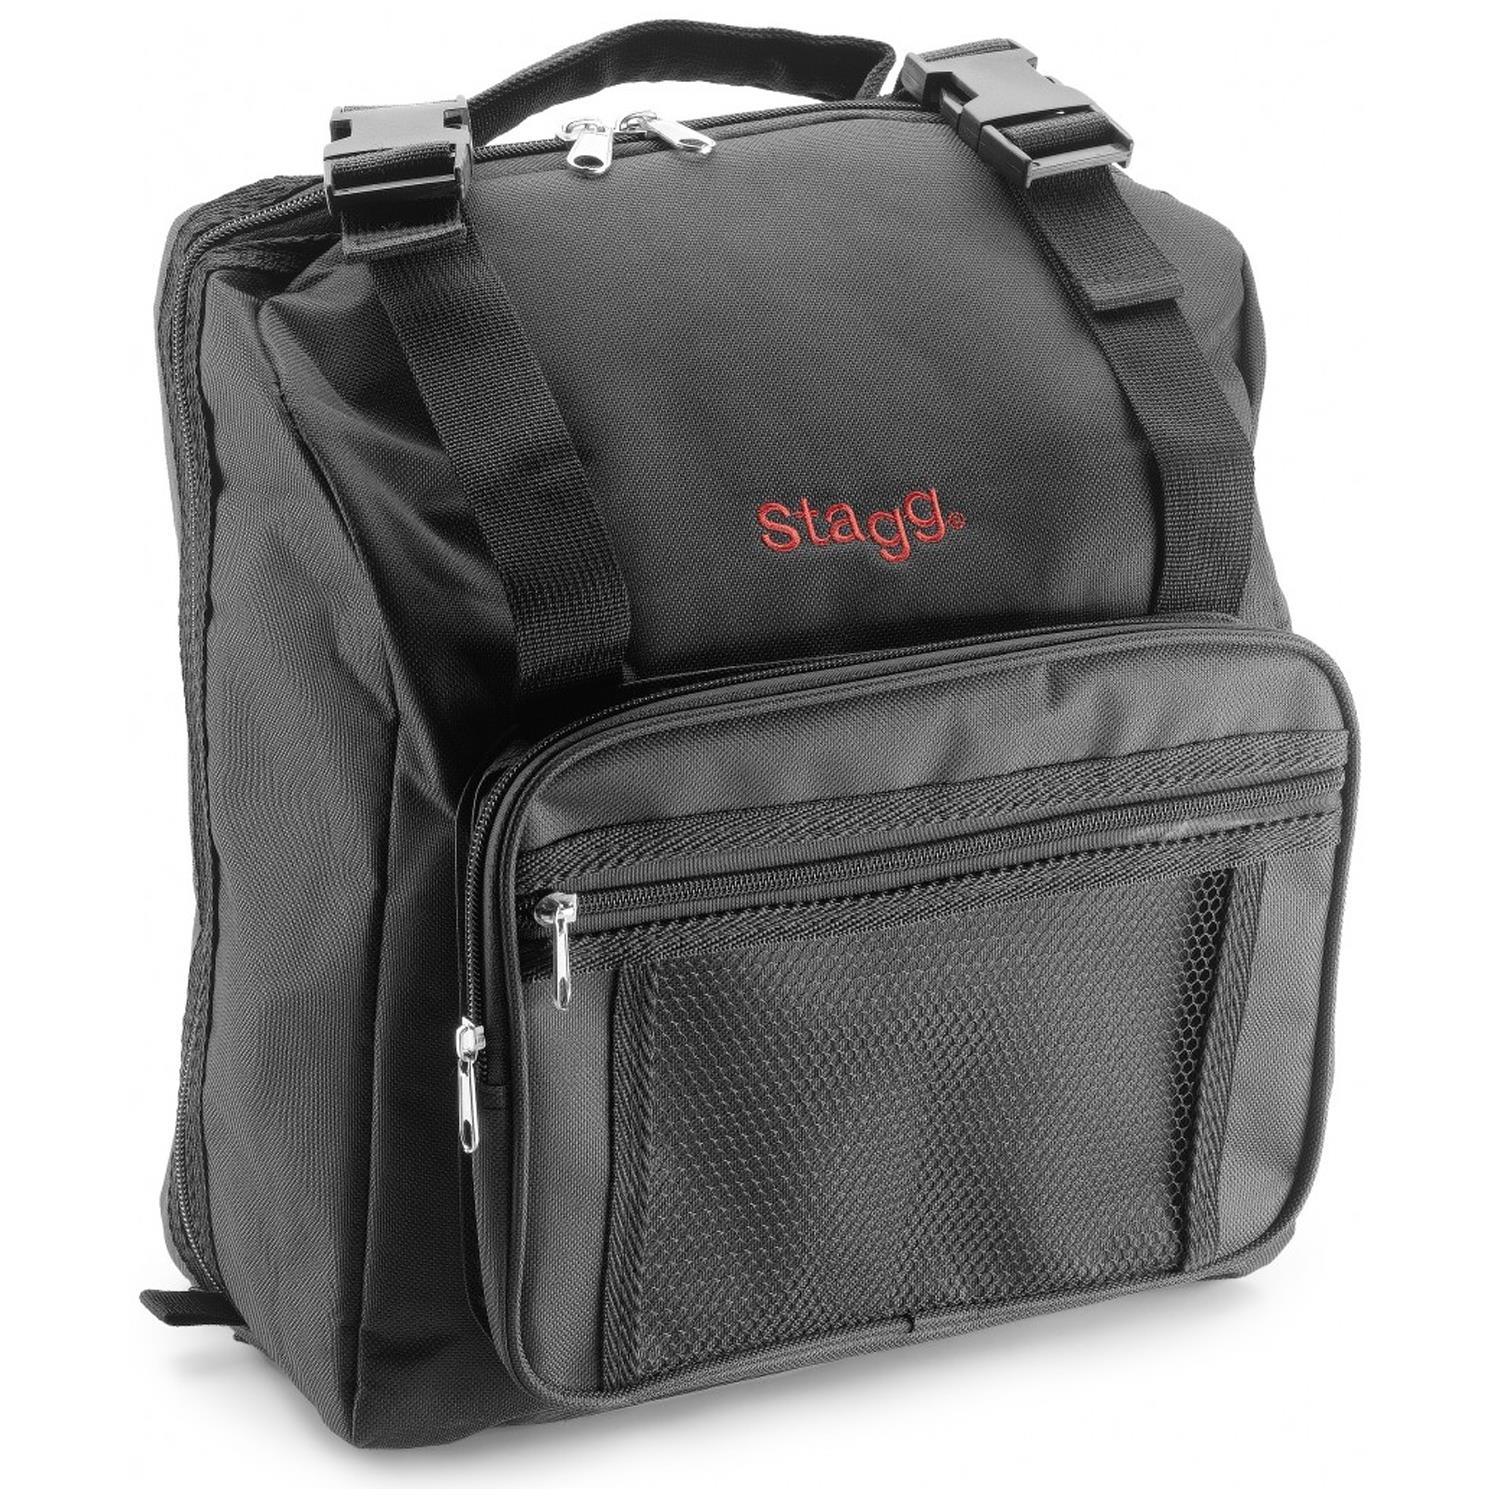 Stagg ACB-120 Carry Bag for Accordion - DY Pro Audio